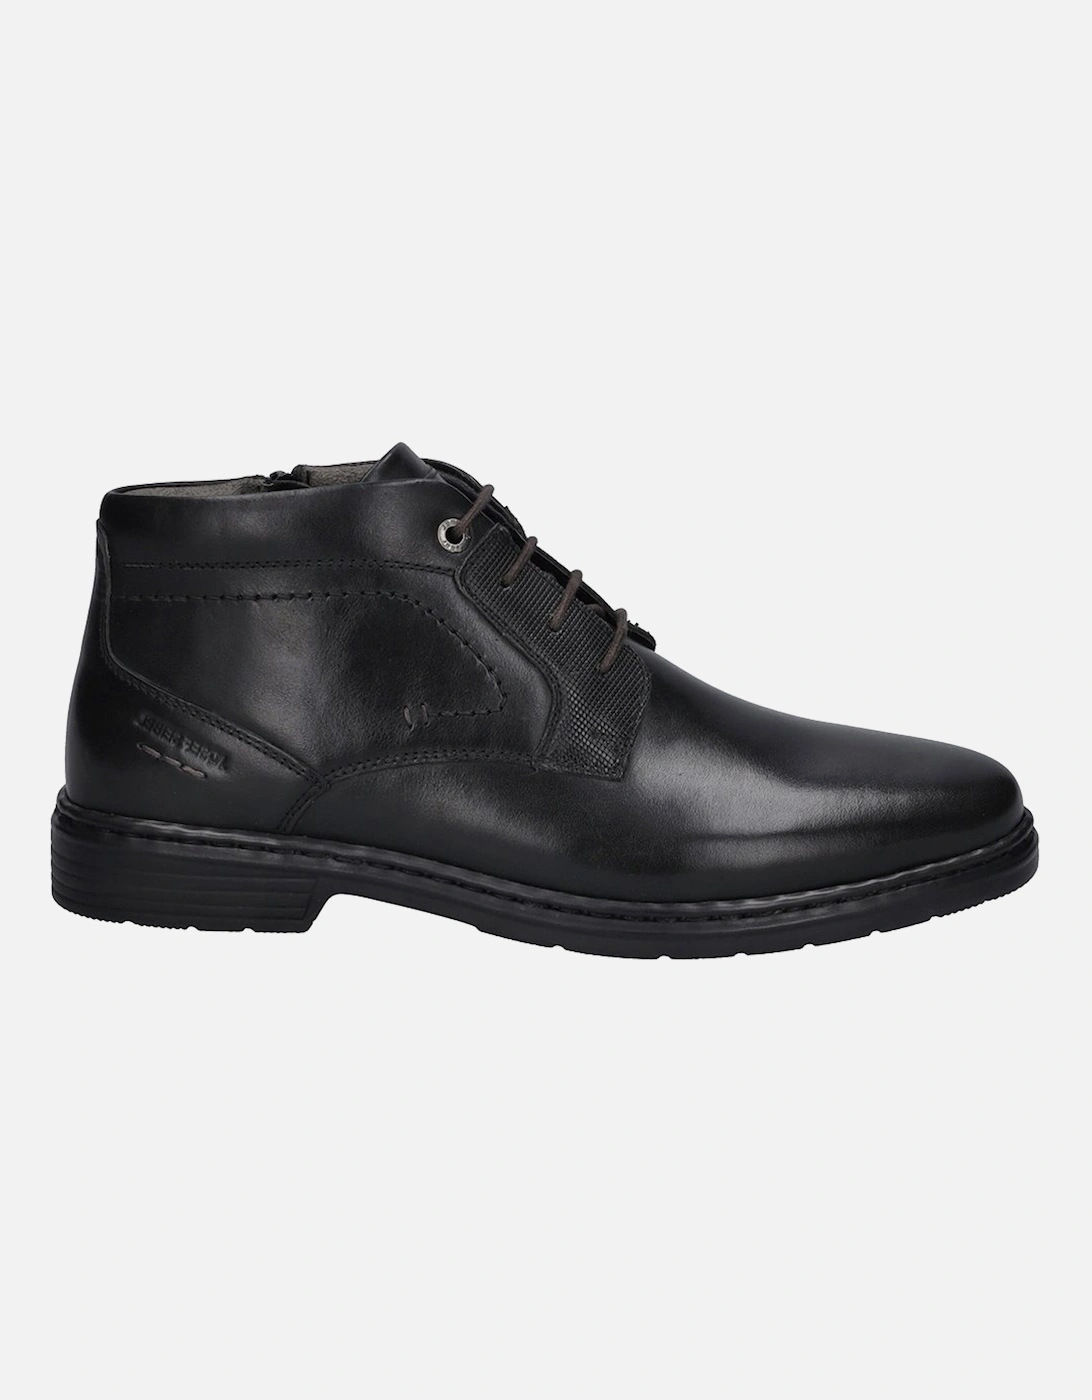 Alastair 17 Mens Boots